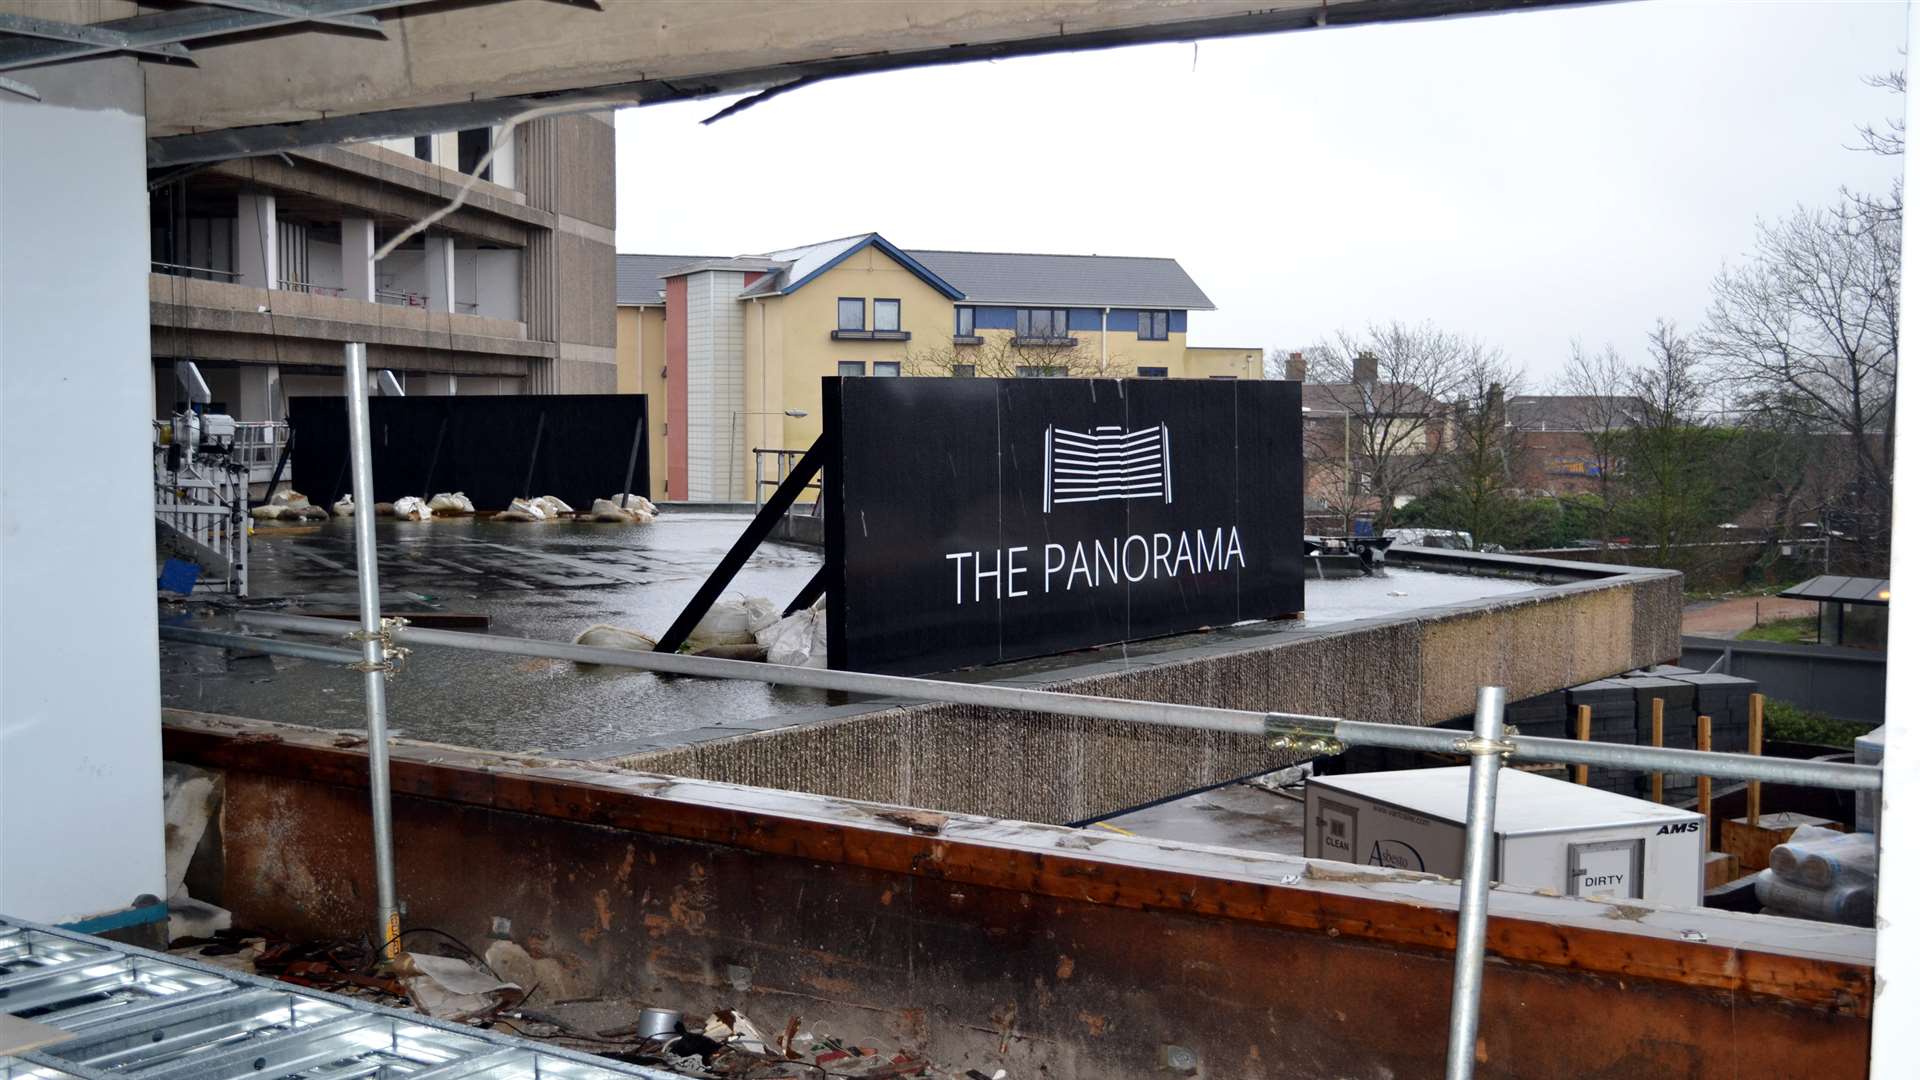 Work inside the Panorama building in February 2014. Courtesy of Steve Salter